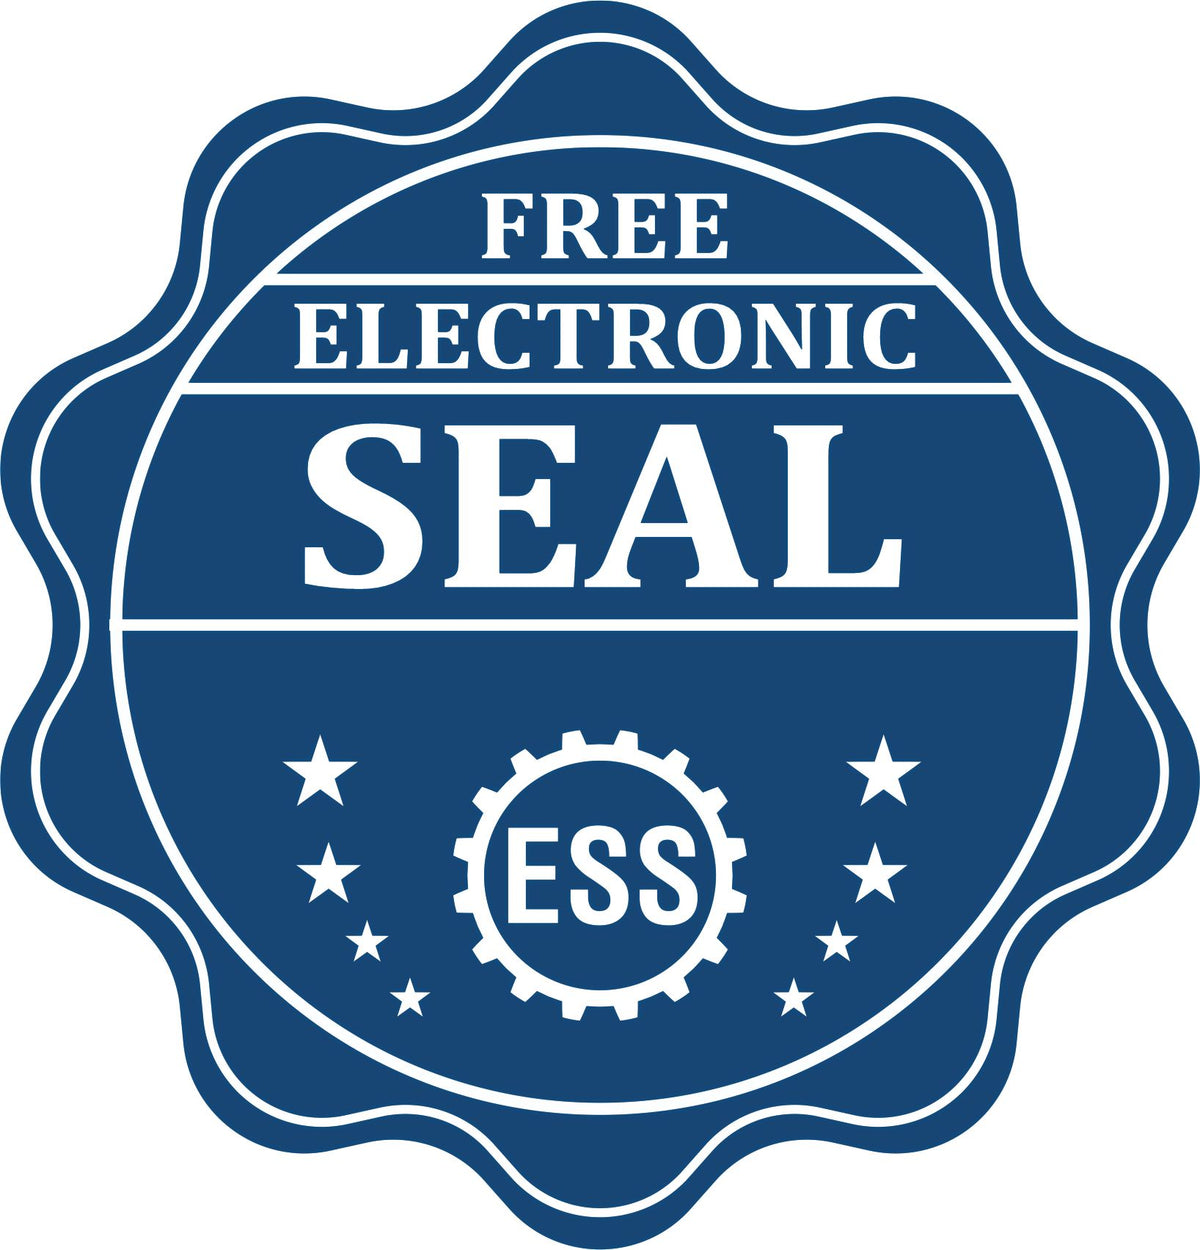 A badge showing a free electronic seal for the Hybrid Wyoming Architect Seal with stars and the ESS gear on the emblem.